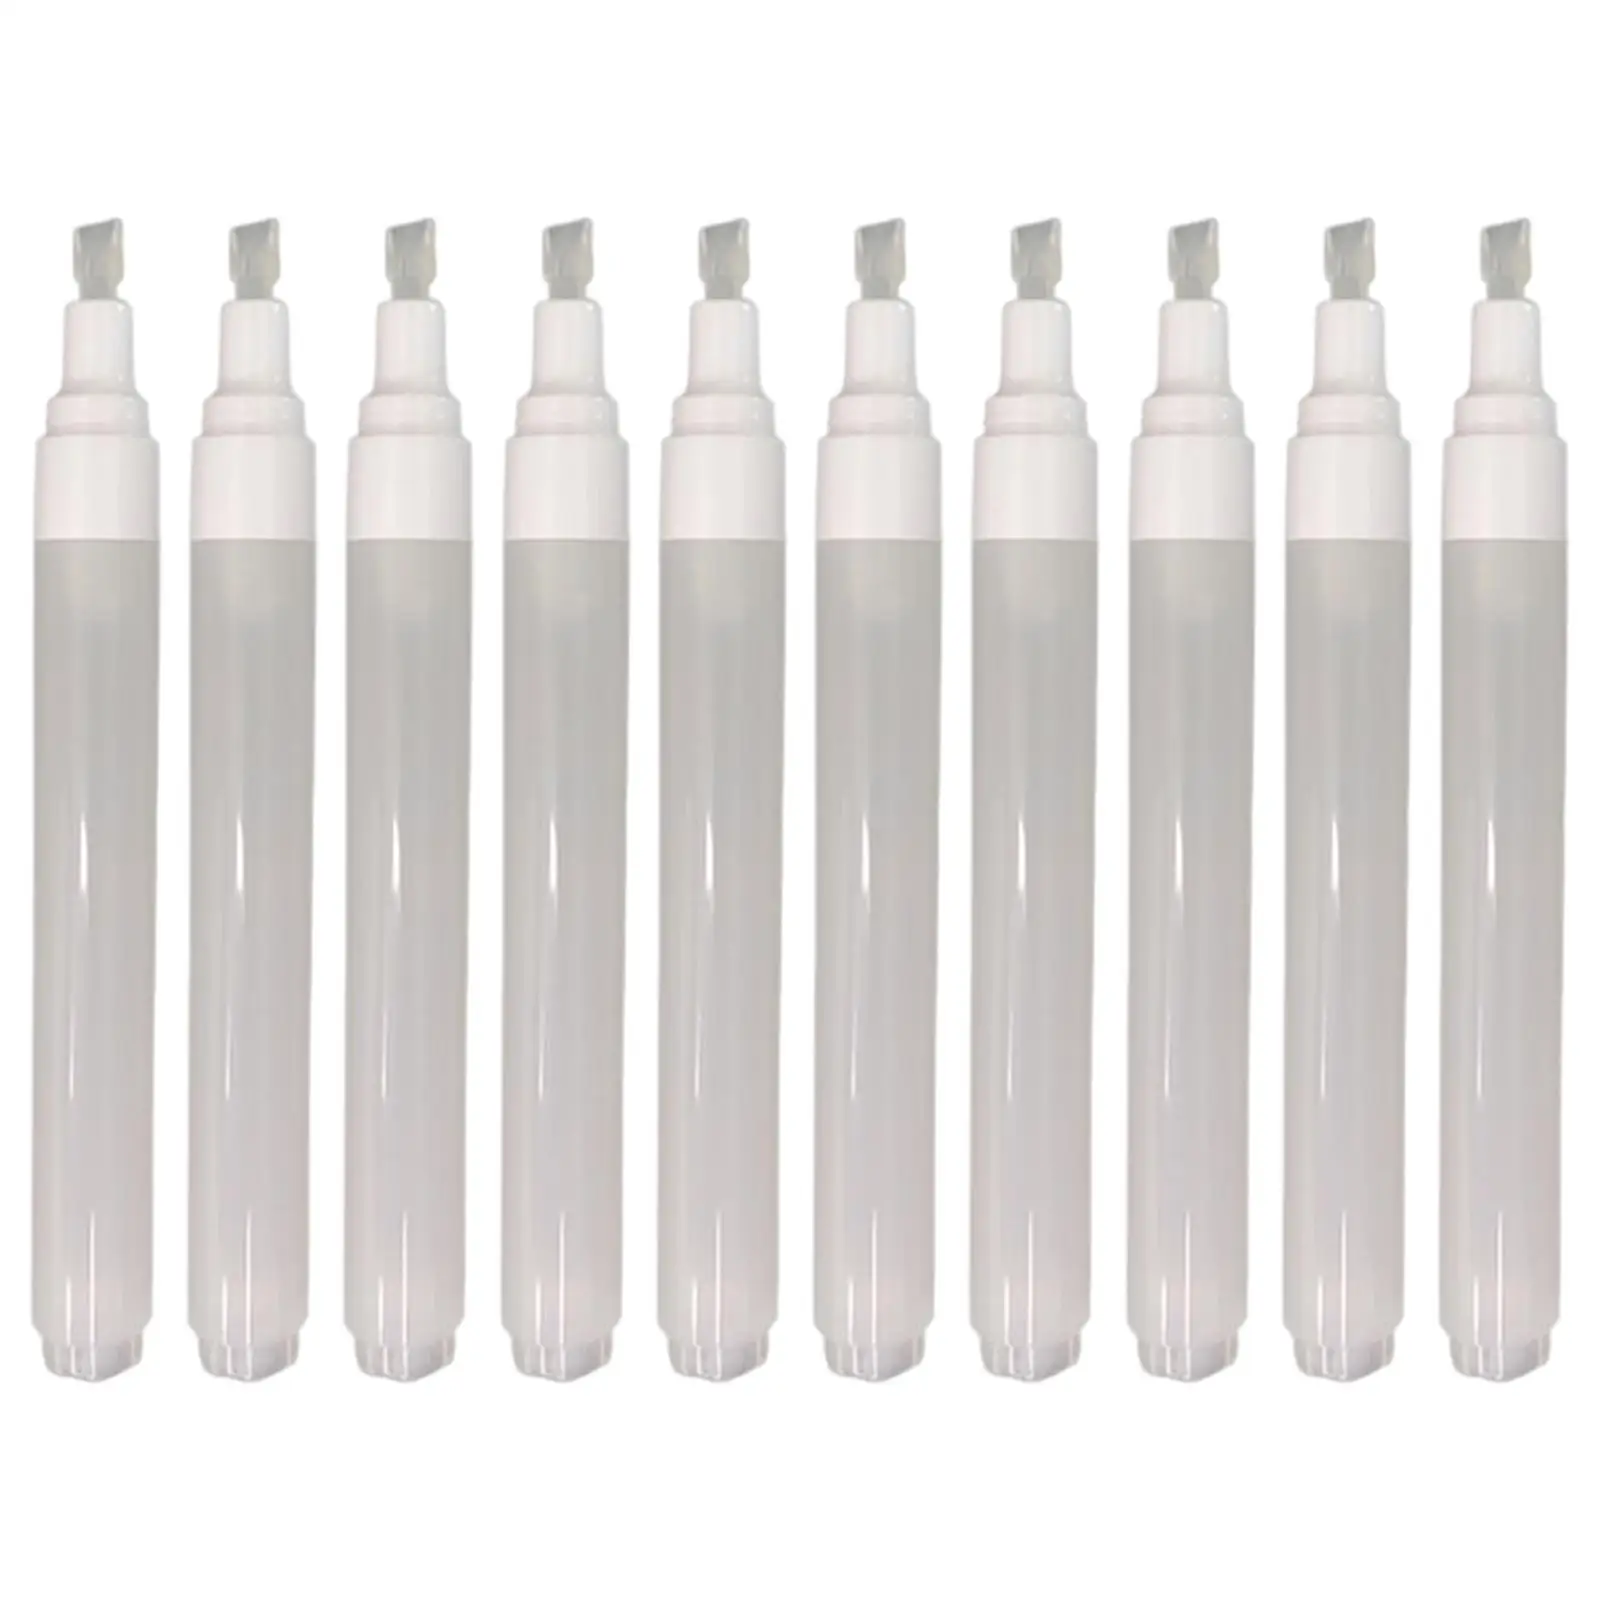 10Pcs Blank Tubes Lip Gloss Cosmetic Empty Refillable Pen for Illustration Drawing